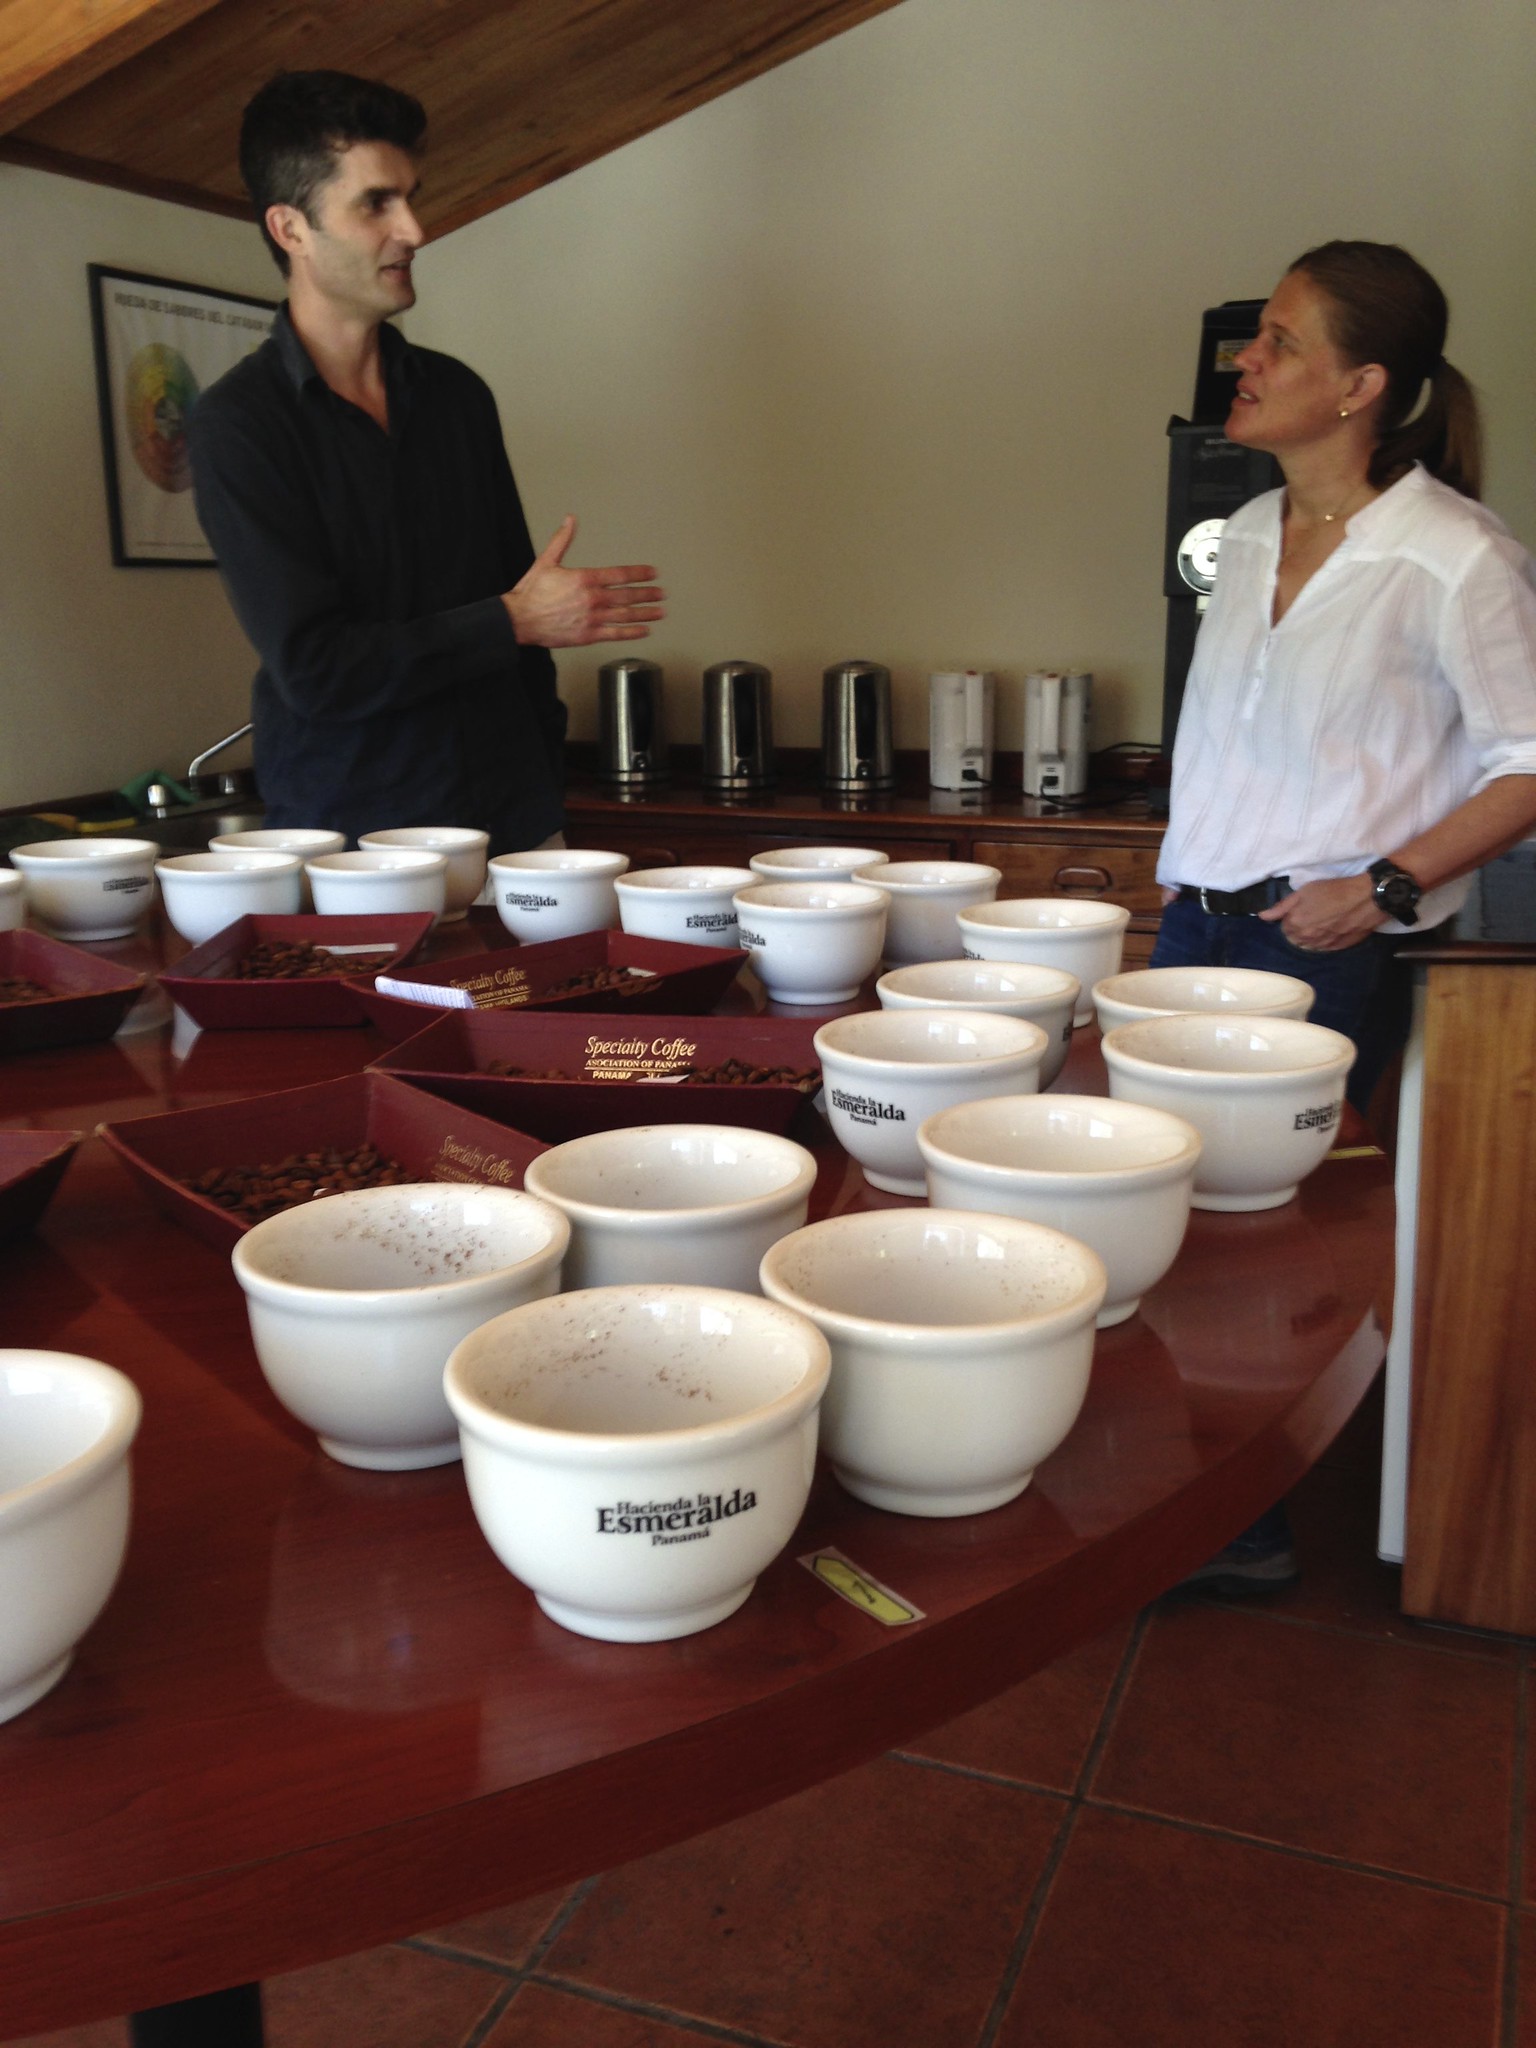 Peter and Rachel talking about the cupping.